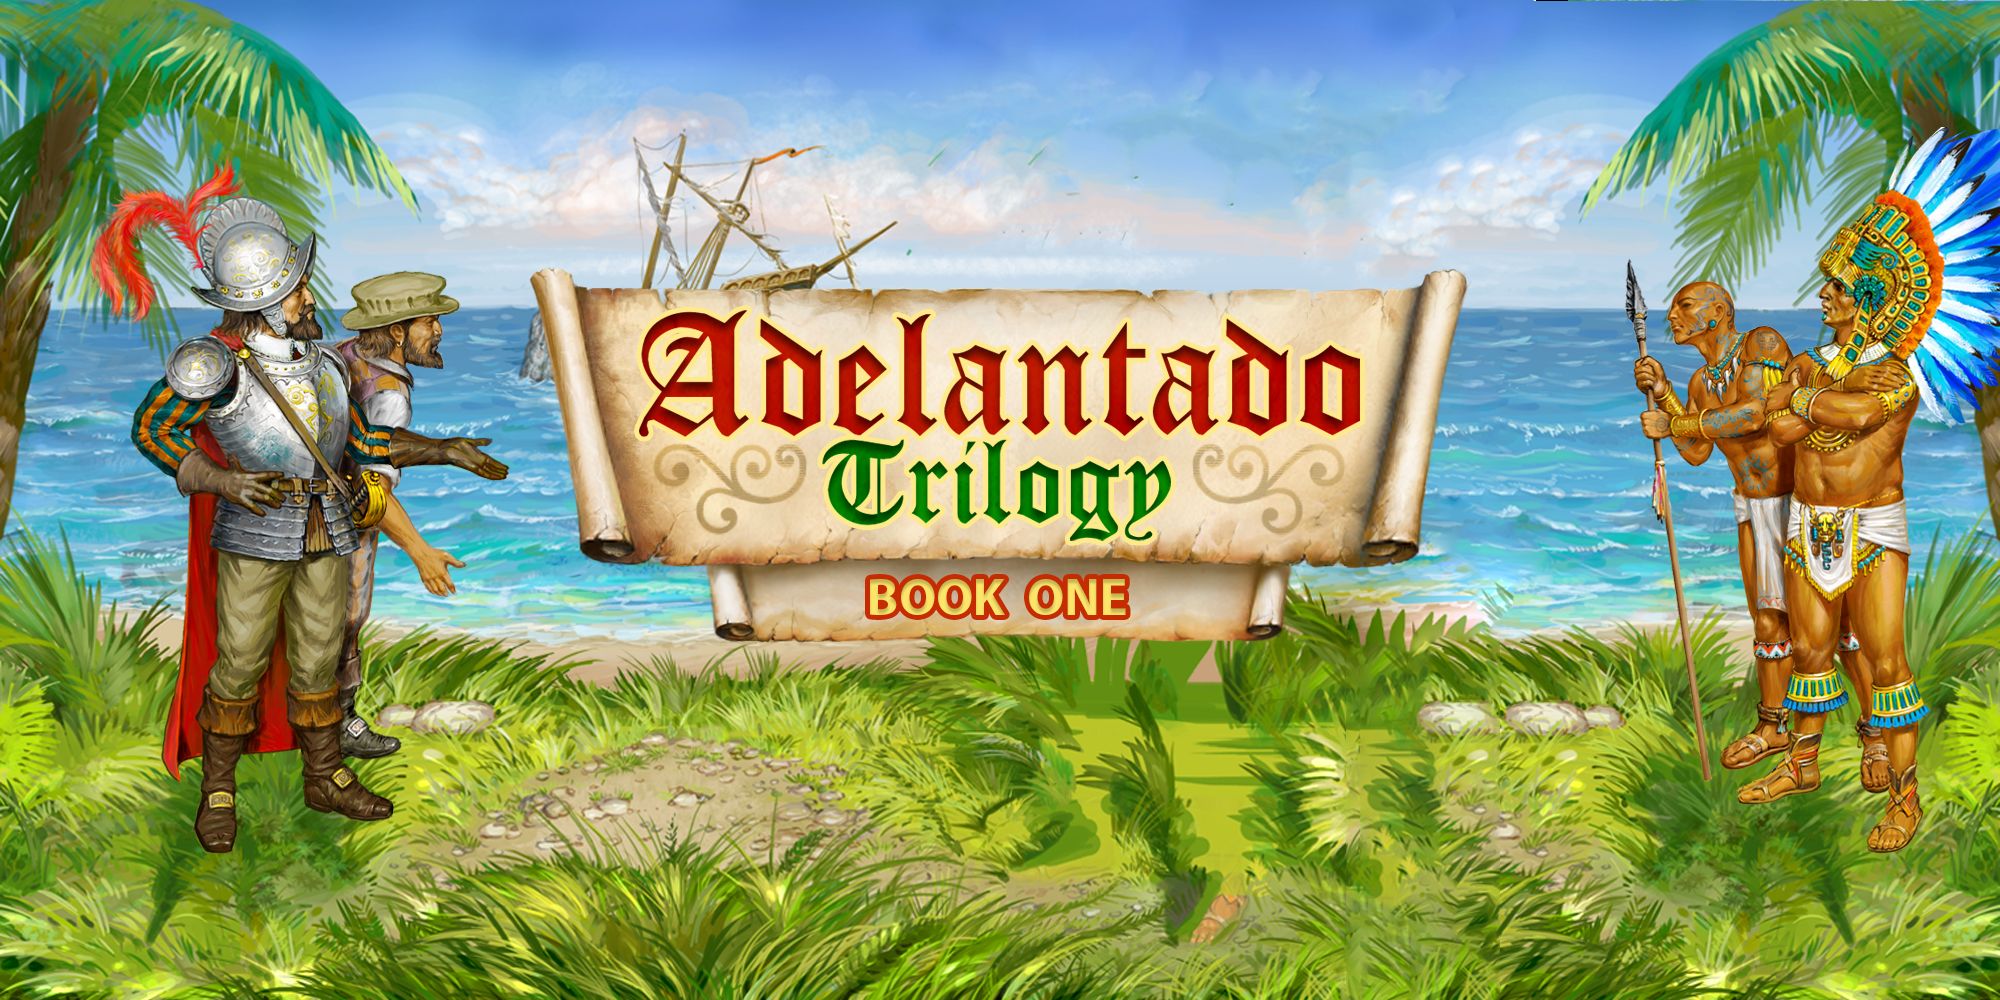 87 Top Best Writers Adelantado Trilogy Book One from Famous authors